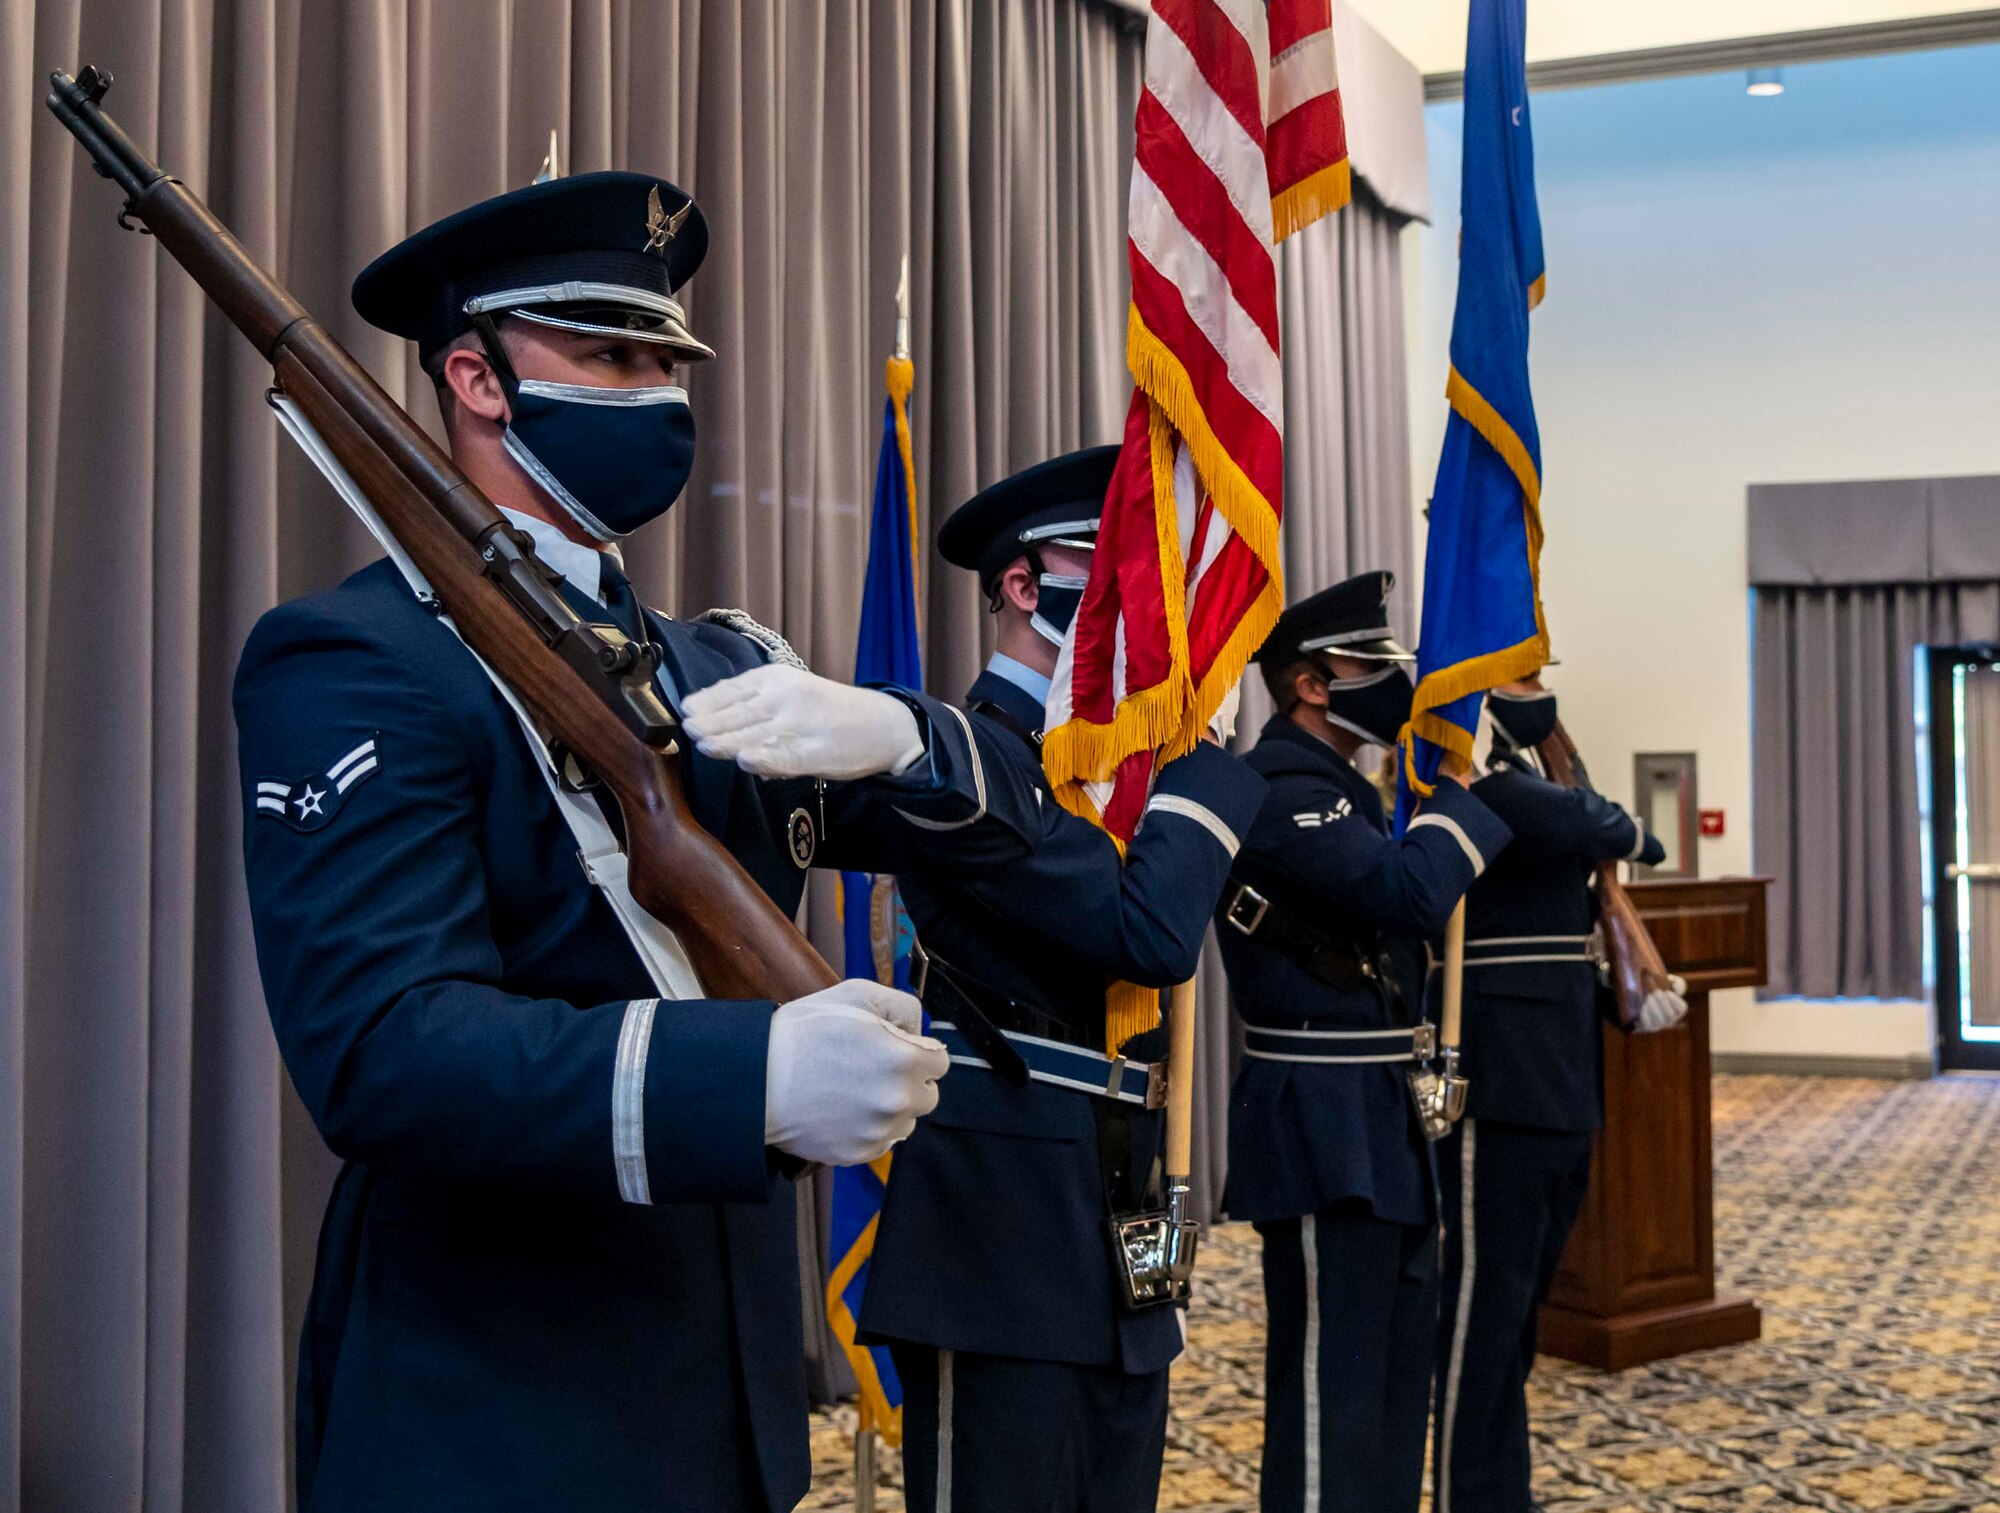 Members of the Dover Air Force Base Honor Guard present the colors during the 2021 Honorary Commander Induction Ceremony Oct. 22, 2021, at Dover AFB, Delaware. Team Dover's HCC program first began in 1992 as a way to match leaders from across the state with commanders from the 436th Airlift Wing, 512th AW, Air Force Mortuary Affairs Operations, Armed Forces Medical Examiner System, Joint Personal Effects Depot and the 373rd Training Squadron, Detachment 3. (U.S. Air Force photo by Senior Airman Stephani Barge)